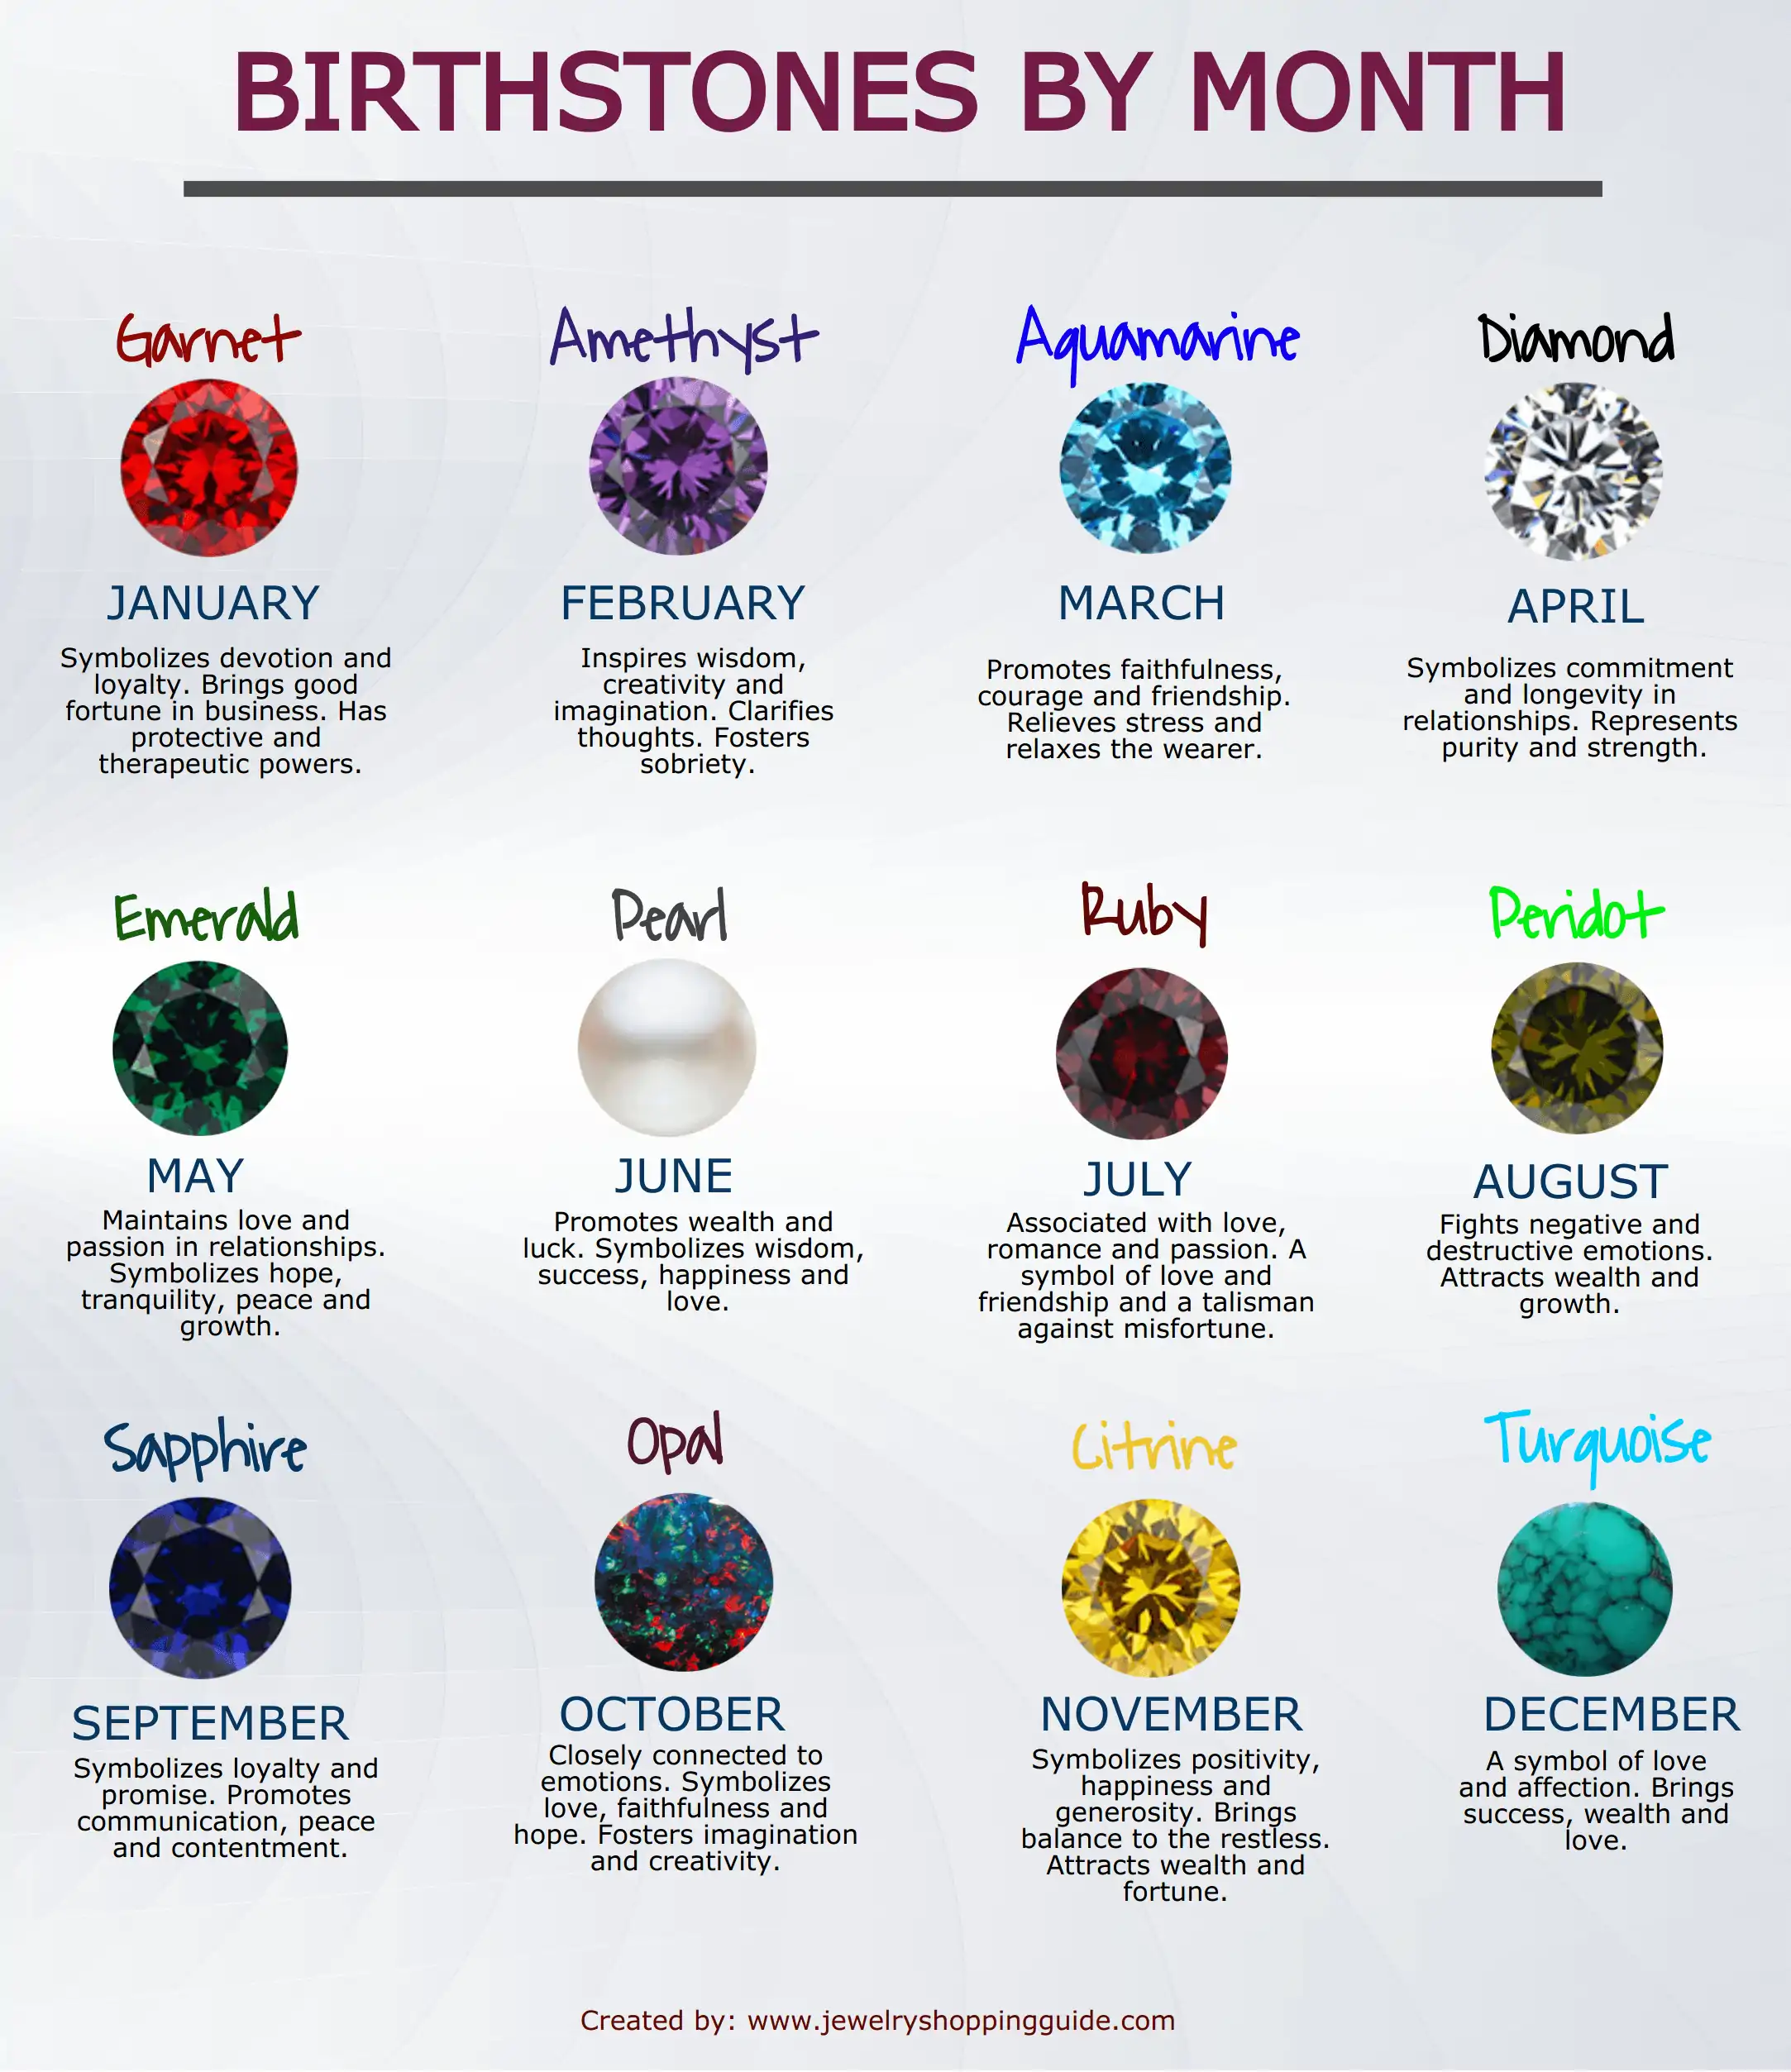 Birthstones by month guide